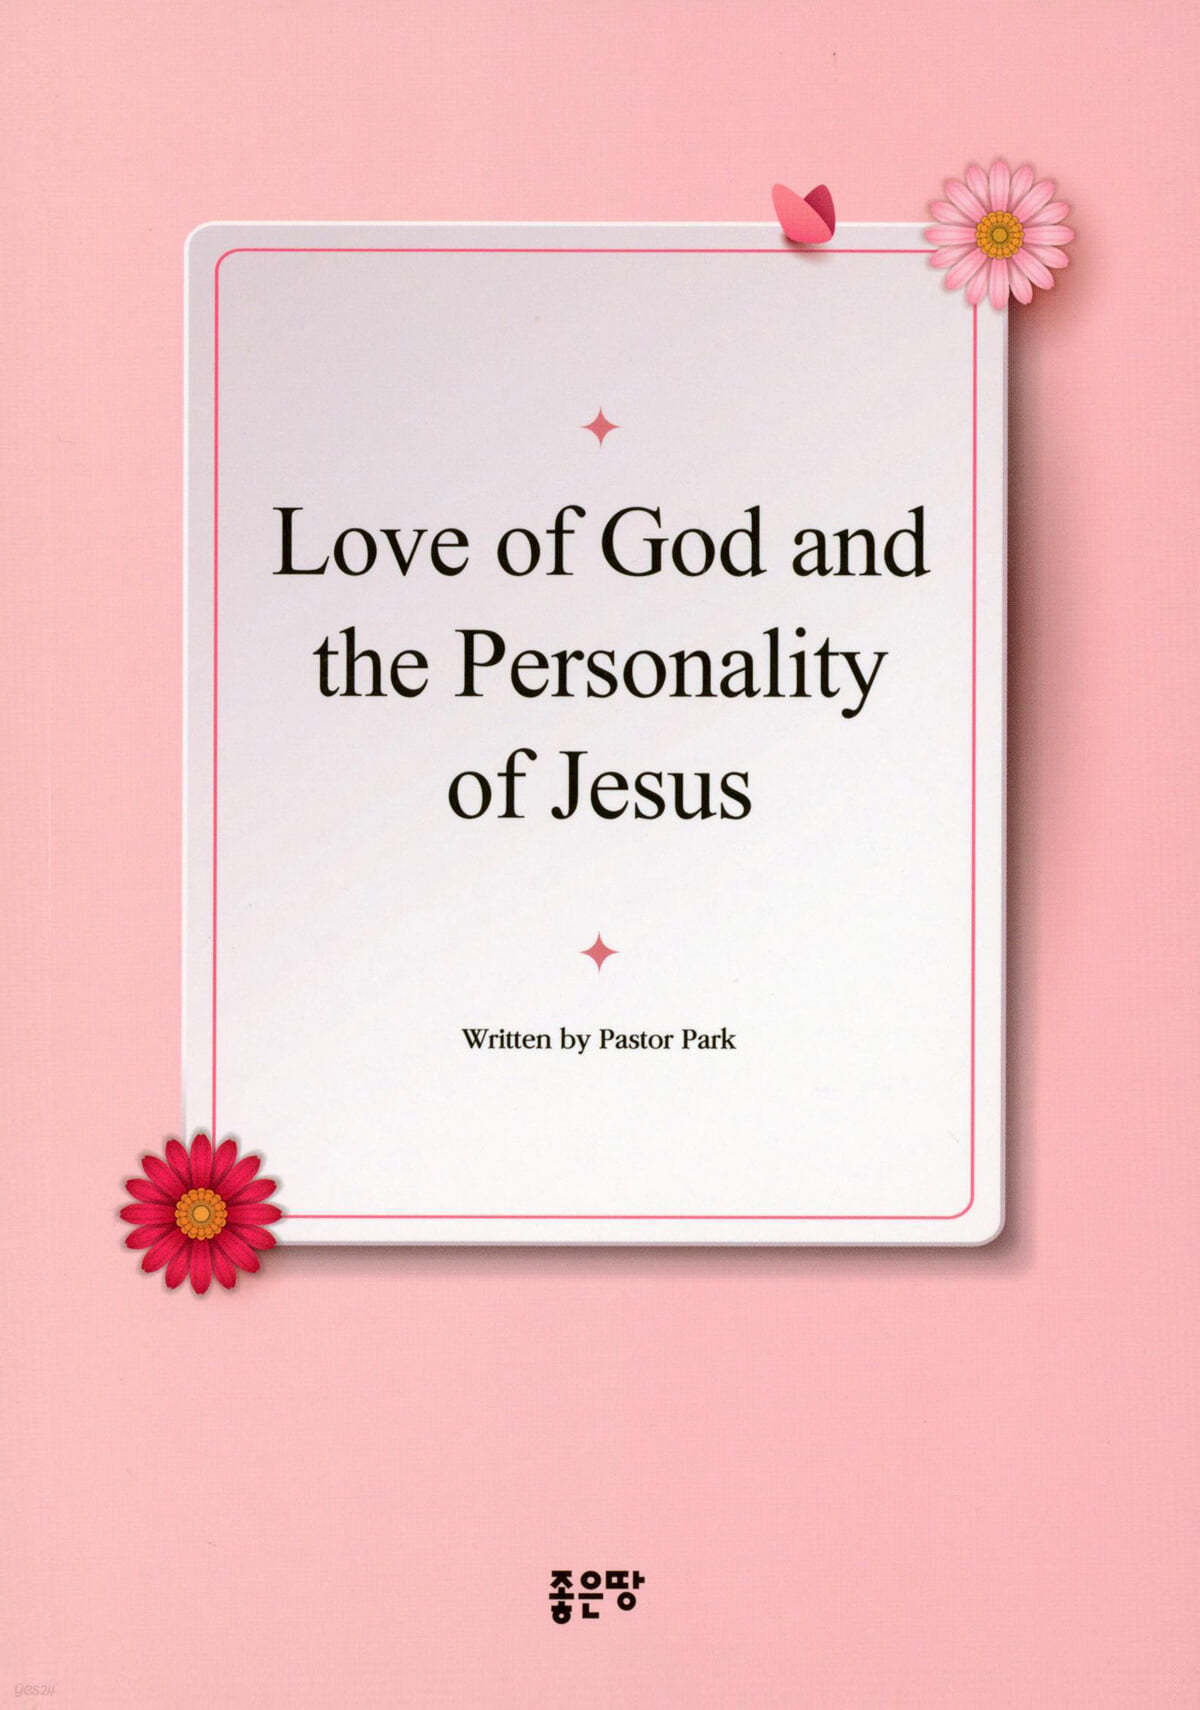 Love of God and the Personality of Jesus